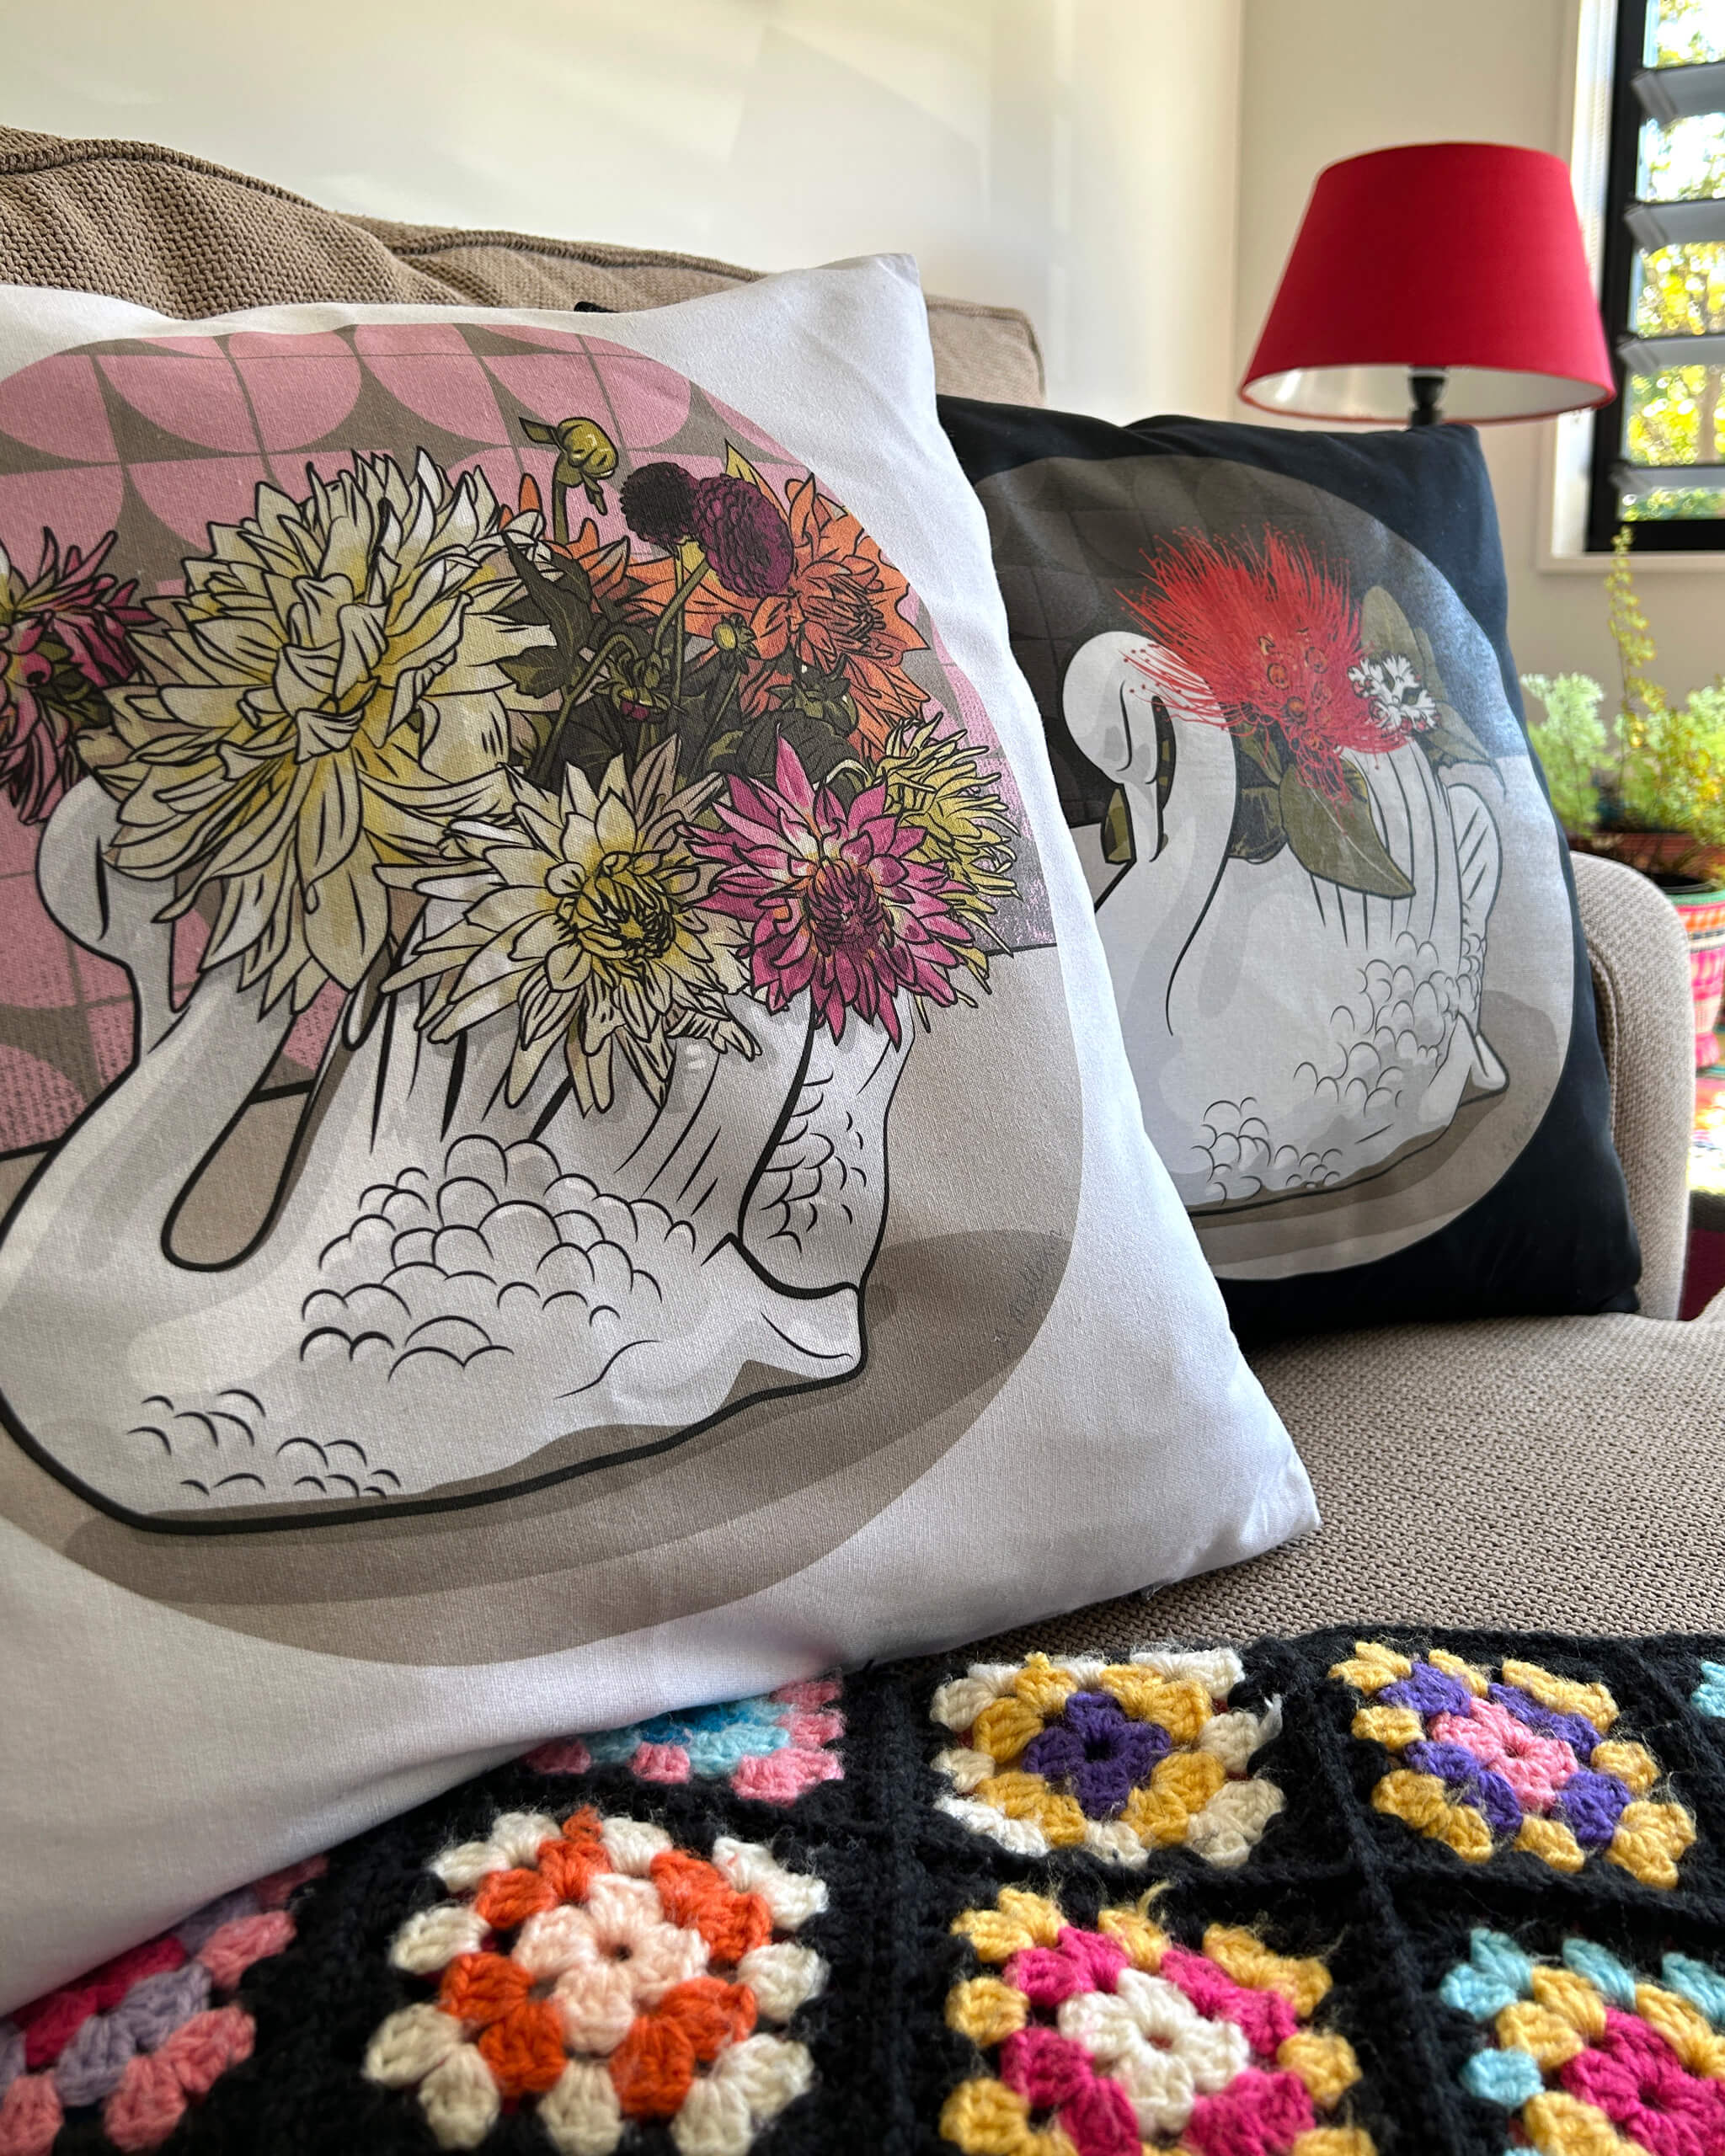 doodlewear 'Crowned Dahlia' (March 2020) Crown Lynn vase art print 100% cotton cushion covers by Contemporary New Zealand artist and doodlewear owner Anna Mollekin